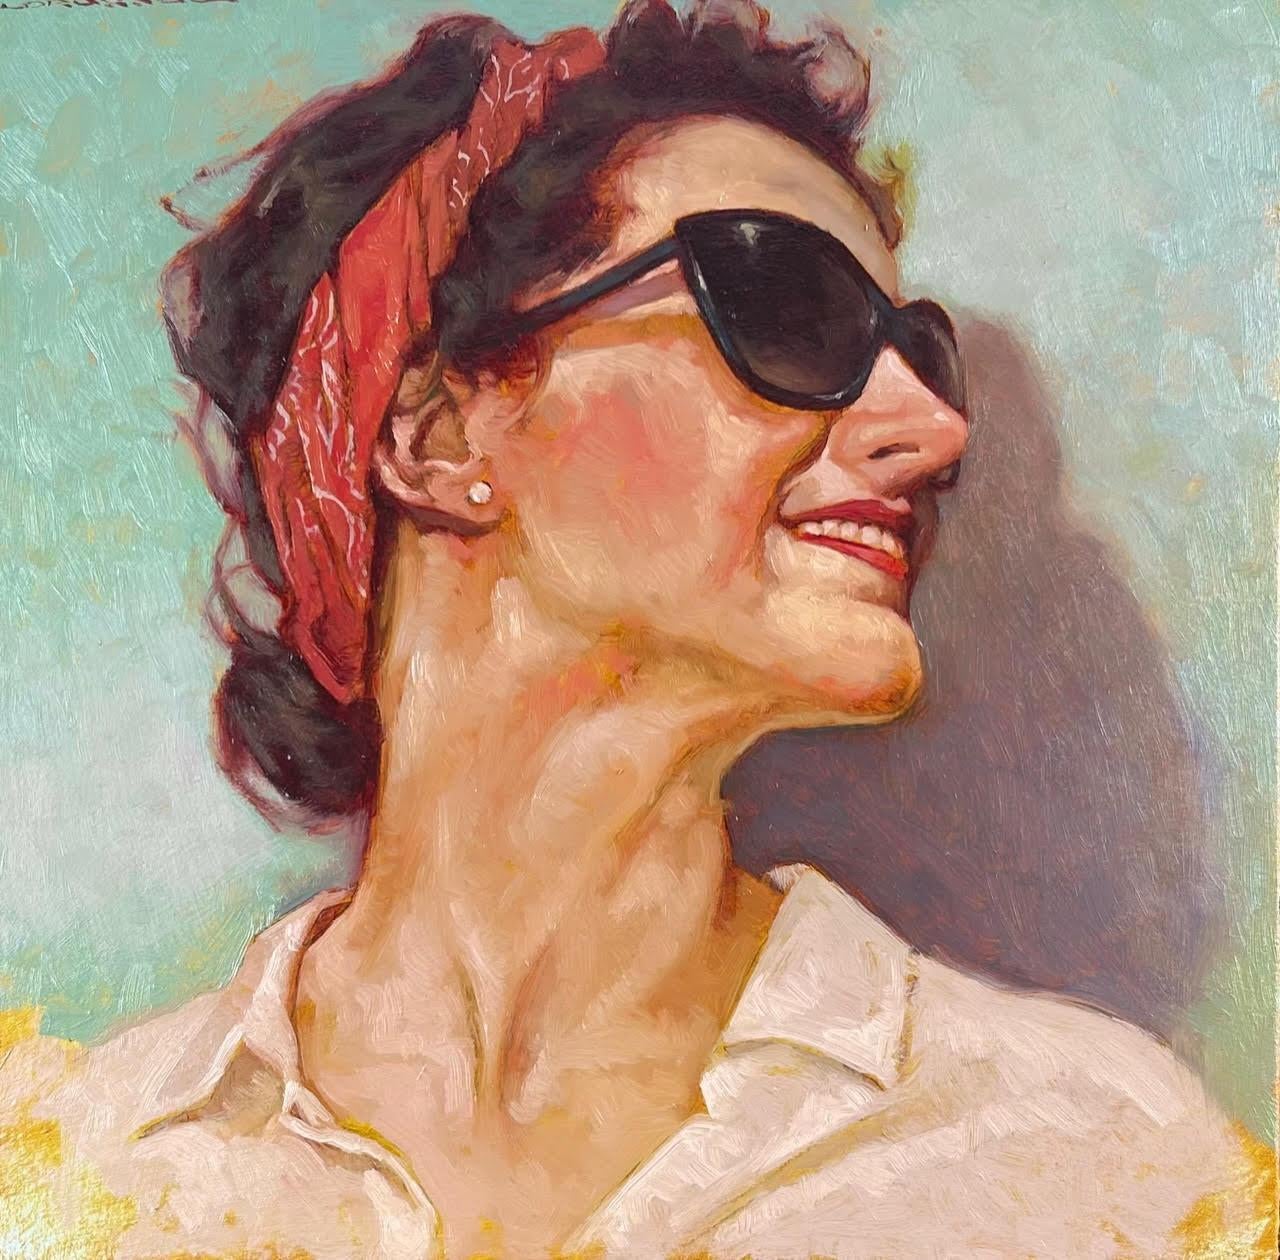 Joseph Lorusso Portrait Painting - "Summer Smile" Oil Painting of woman smiling wearing a red bandana and lipstick